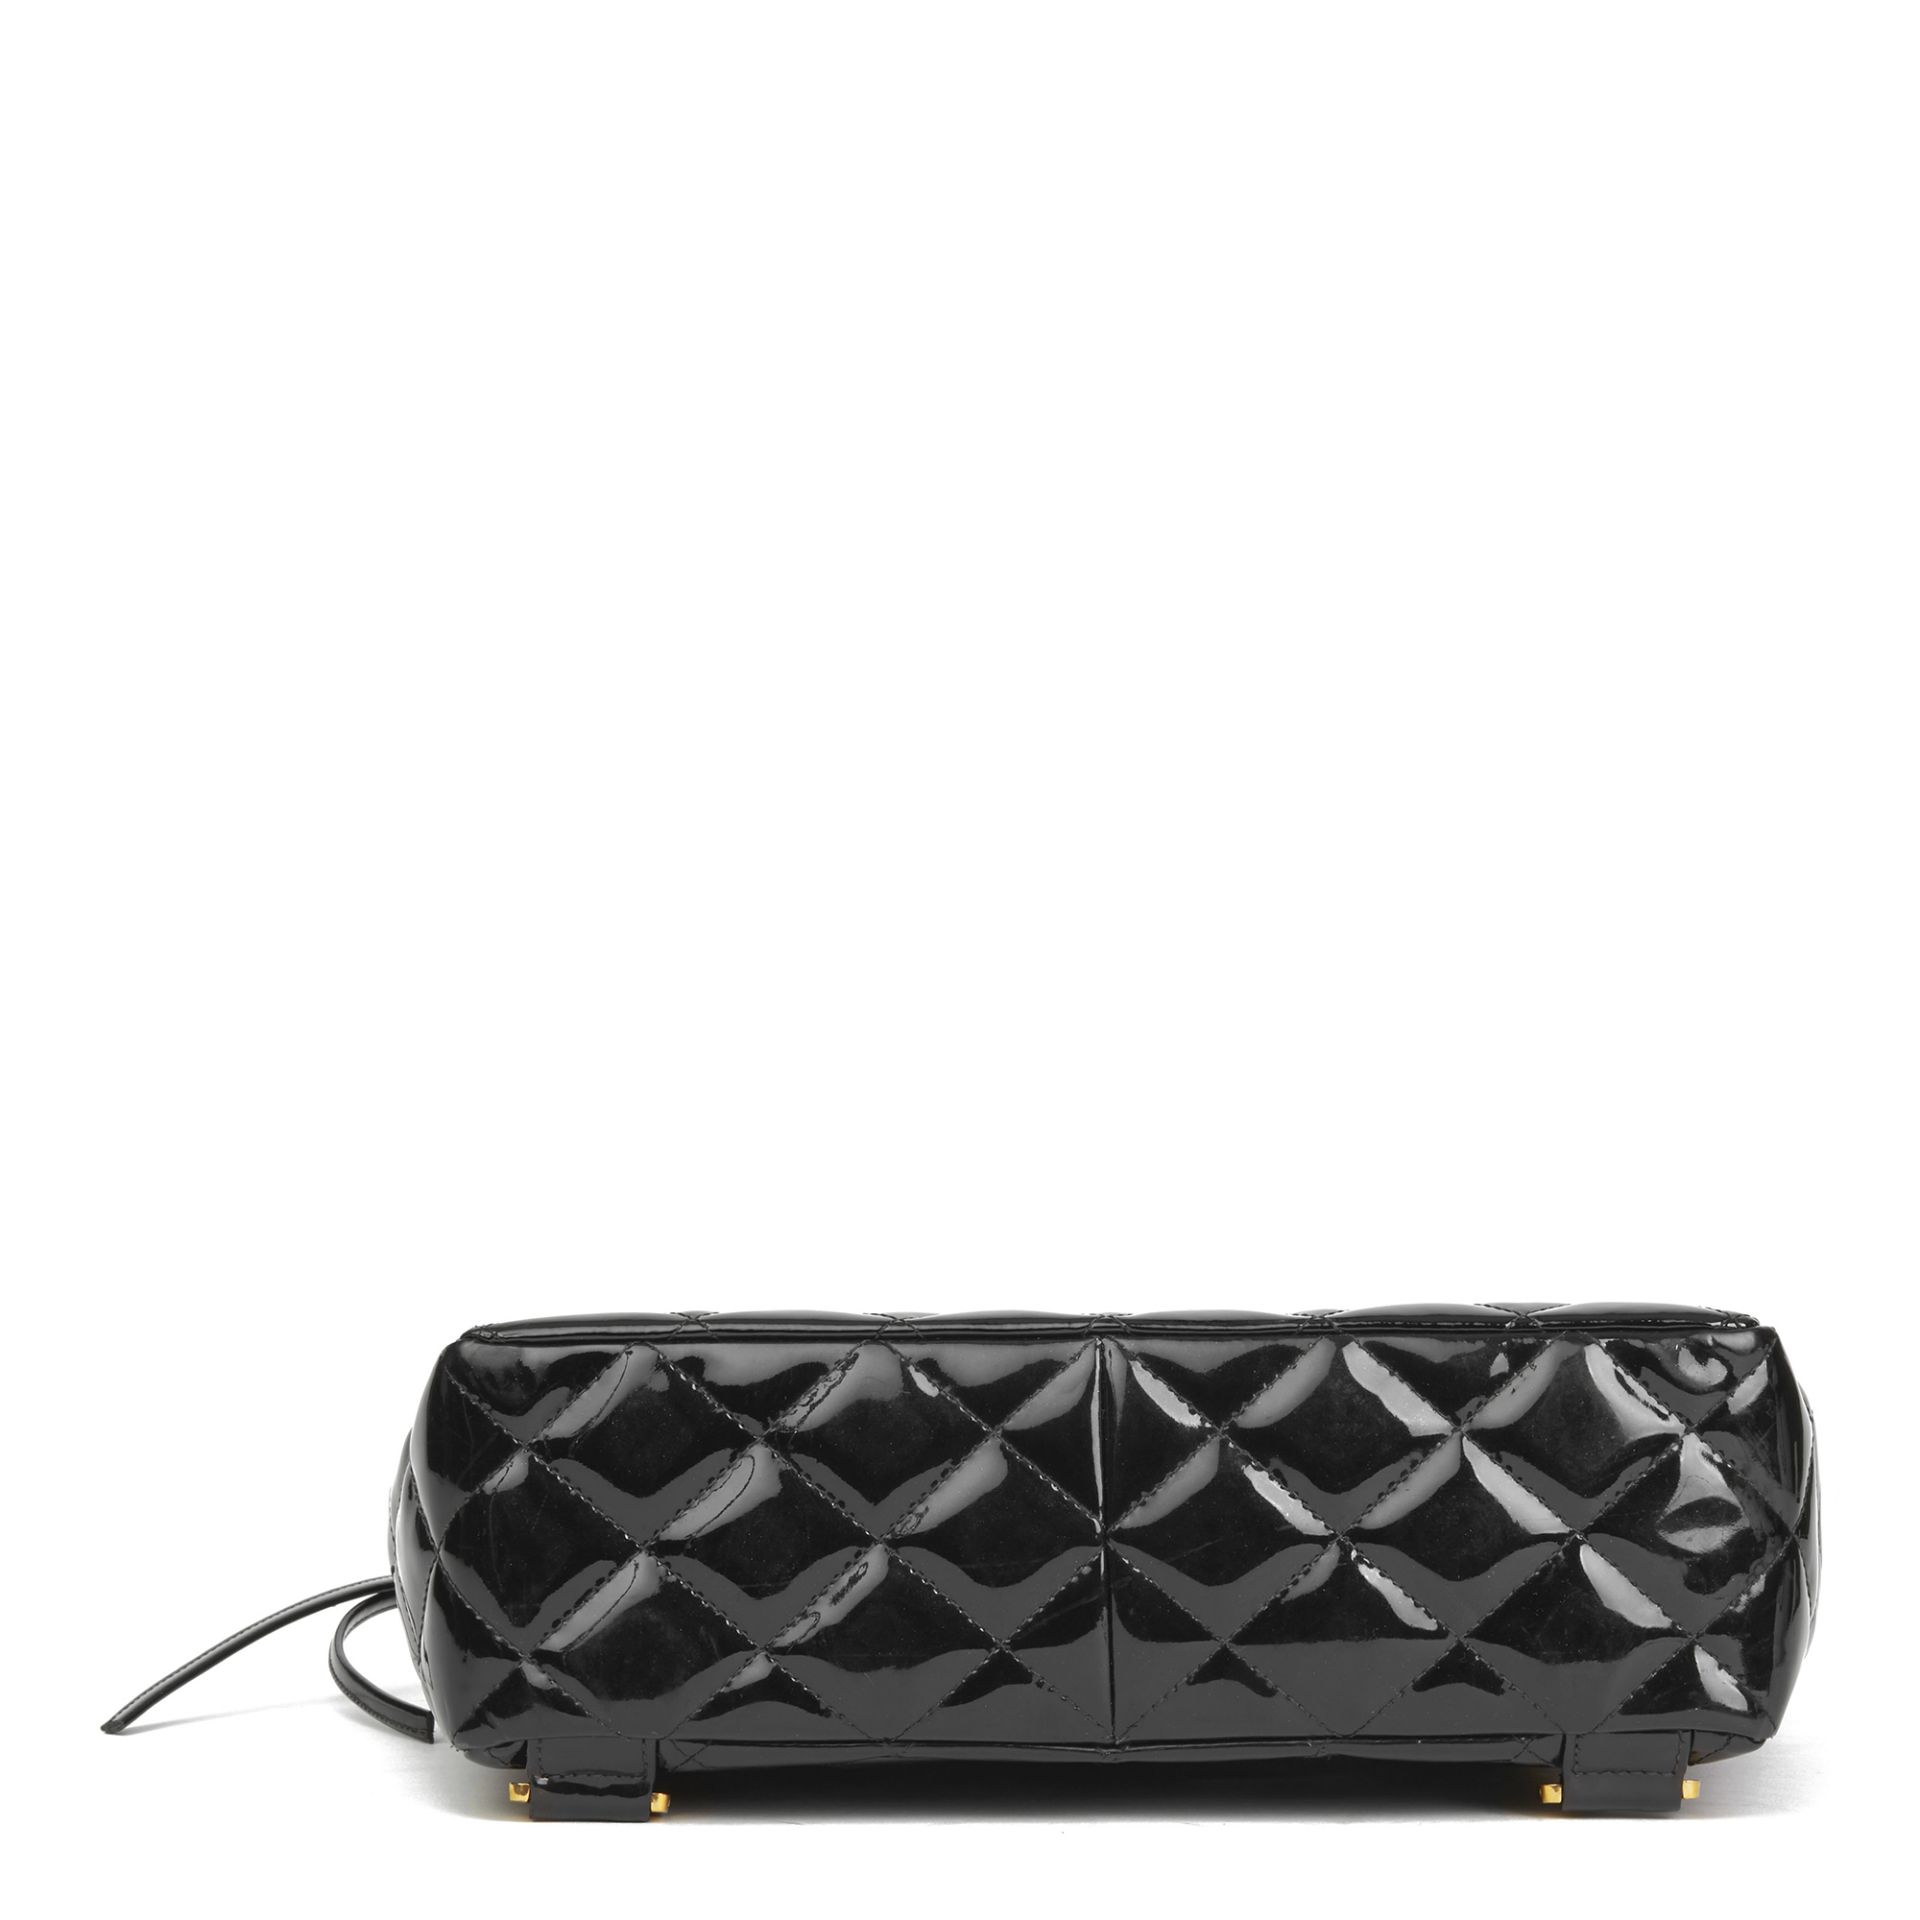 Chanel Black Quilted Patent Leather Vintage Classic Timeless Backpack - Image 9 of 12